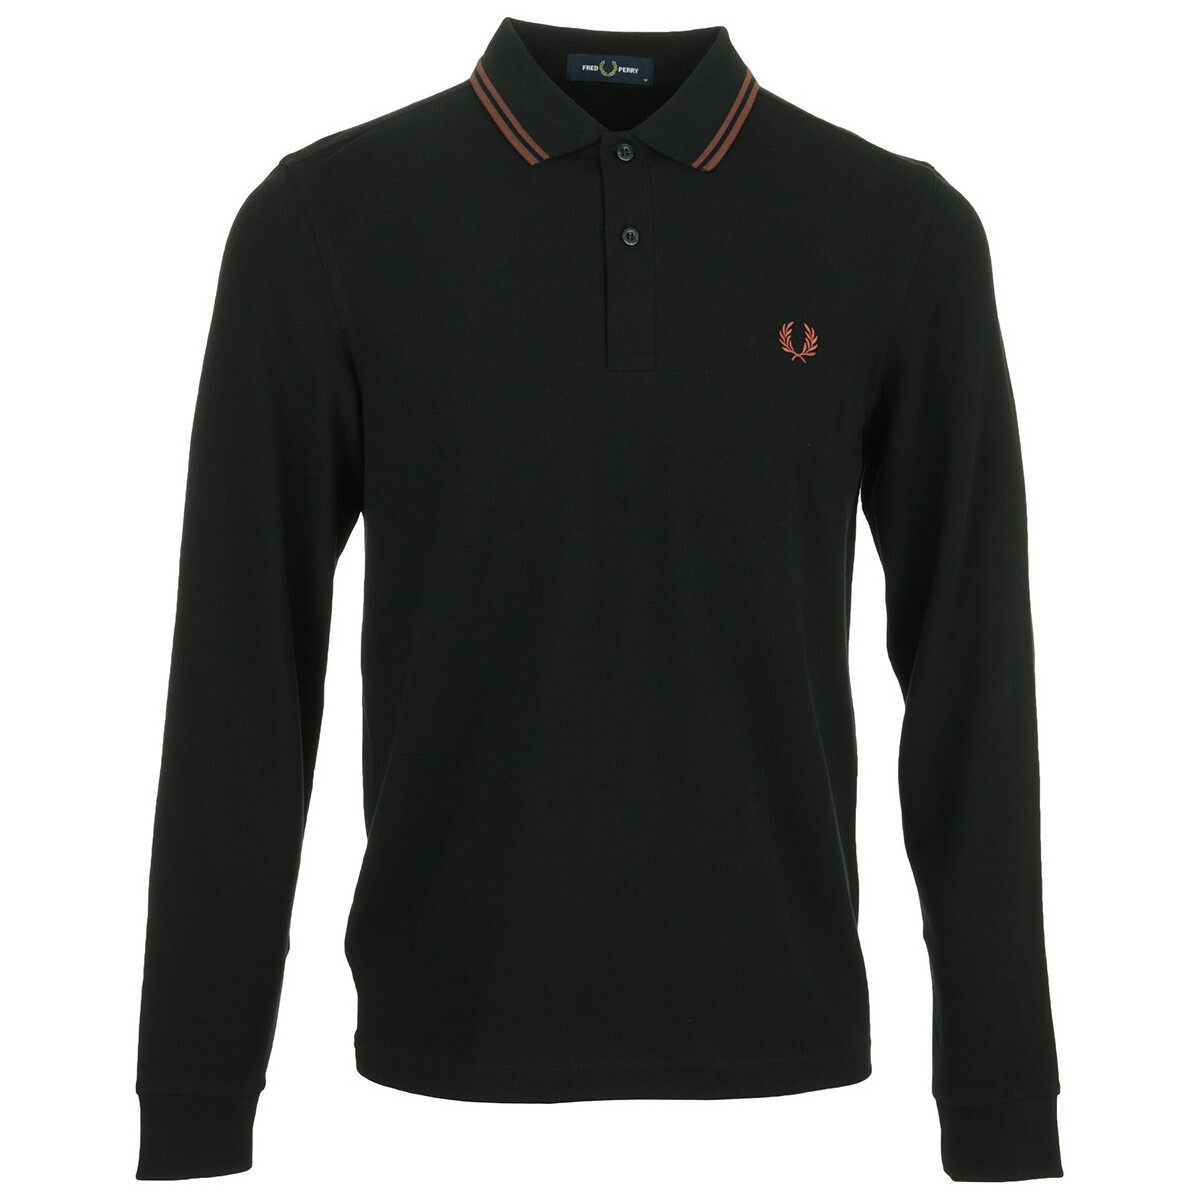 Textiel Heren T-shirts & Polo’s Fred Perry LS Twin Tipped Zwart